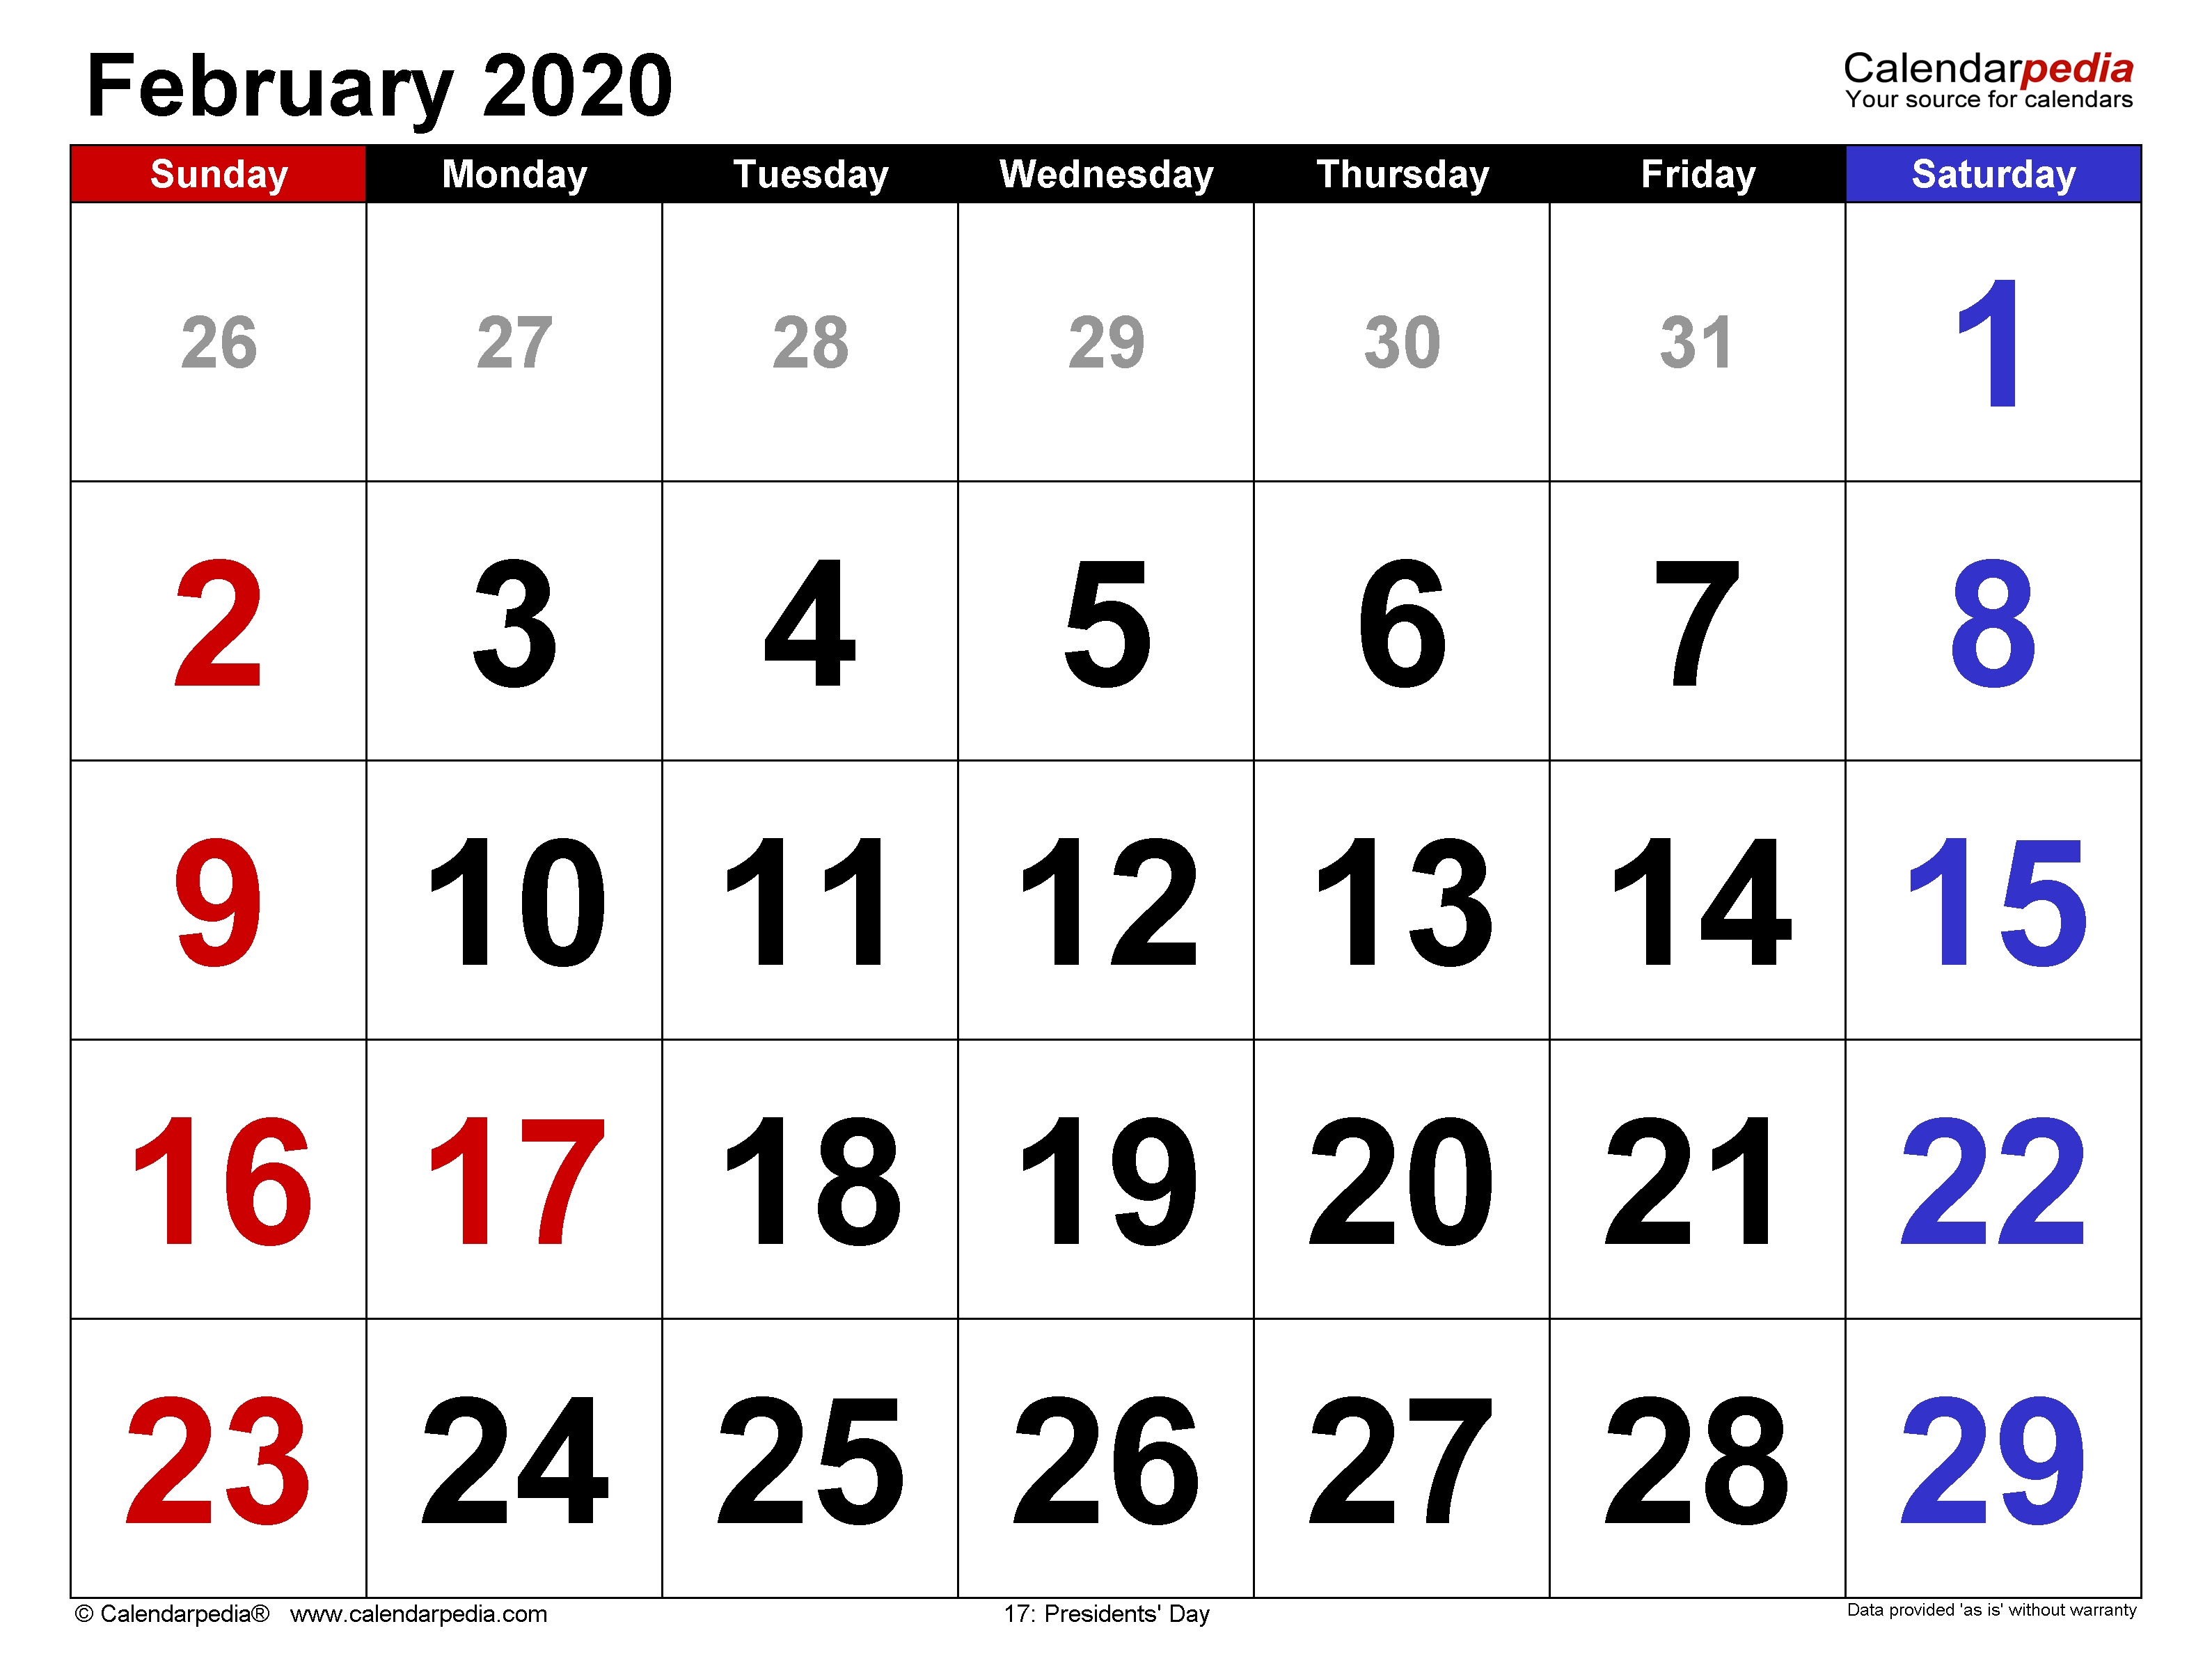 February 2020 - Calendar Templates For Word, Excel And Pdf